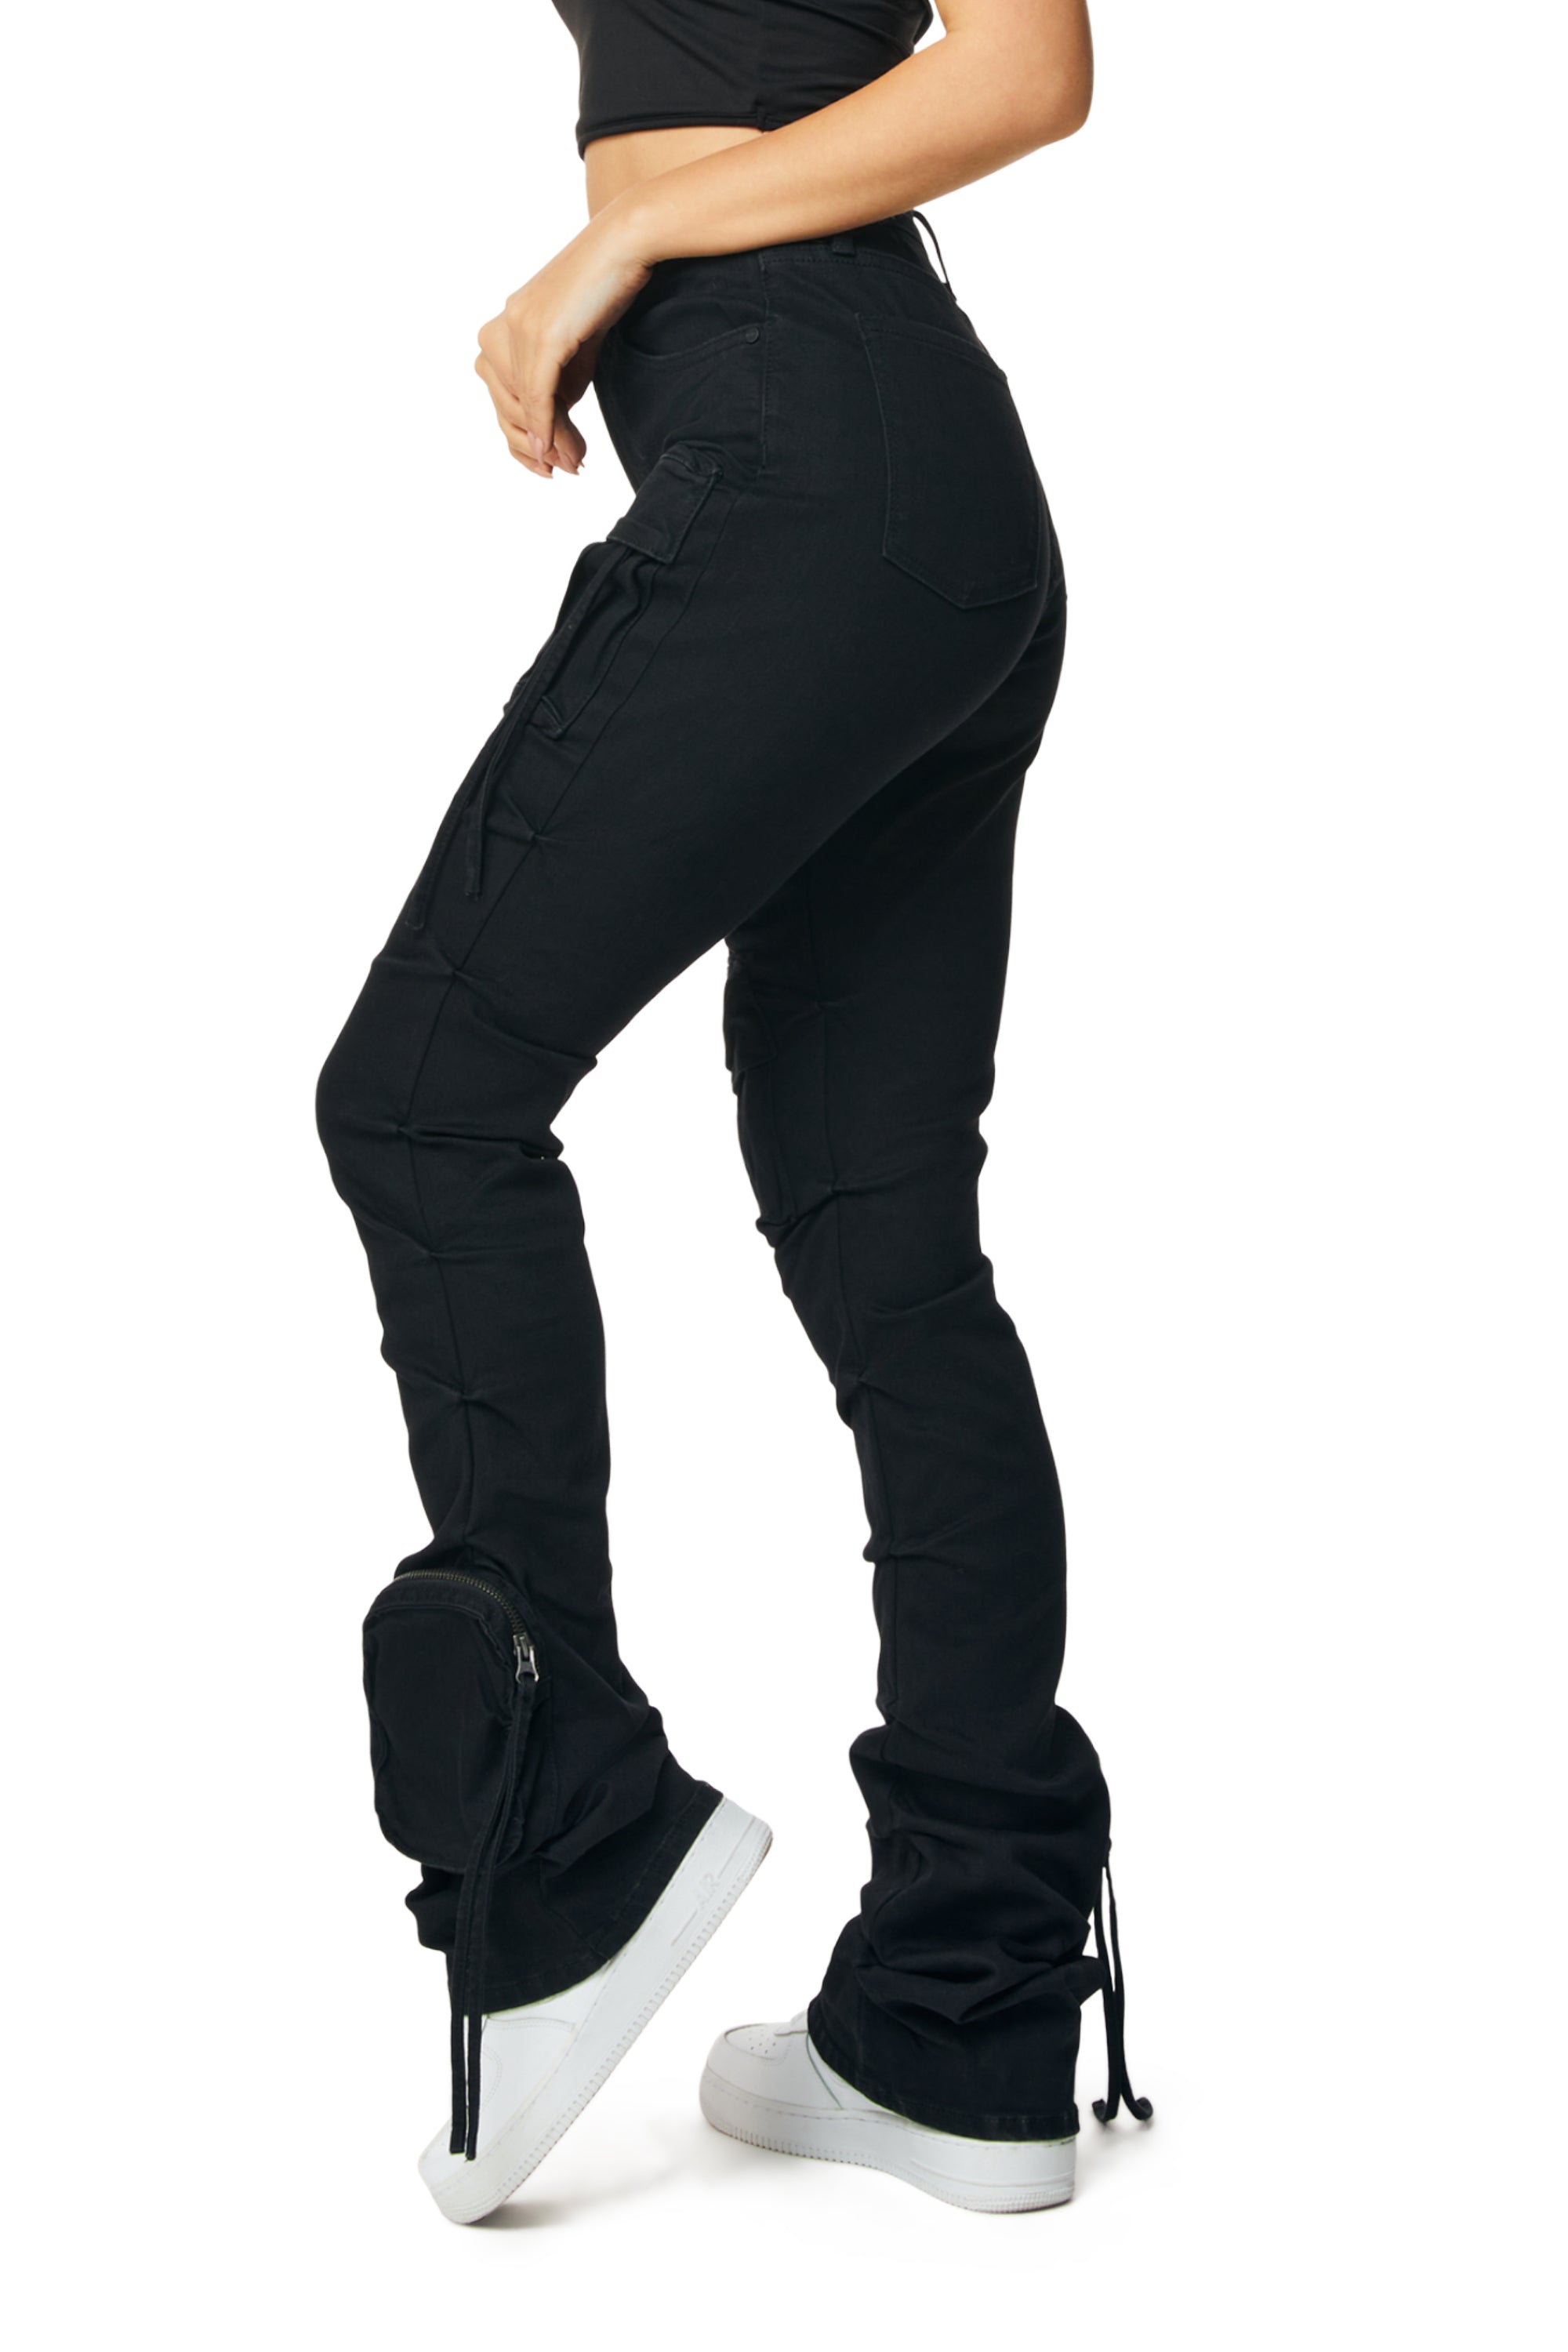 High Rise Cargo Stacked Denim Jeans - Deep Black